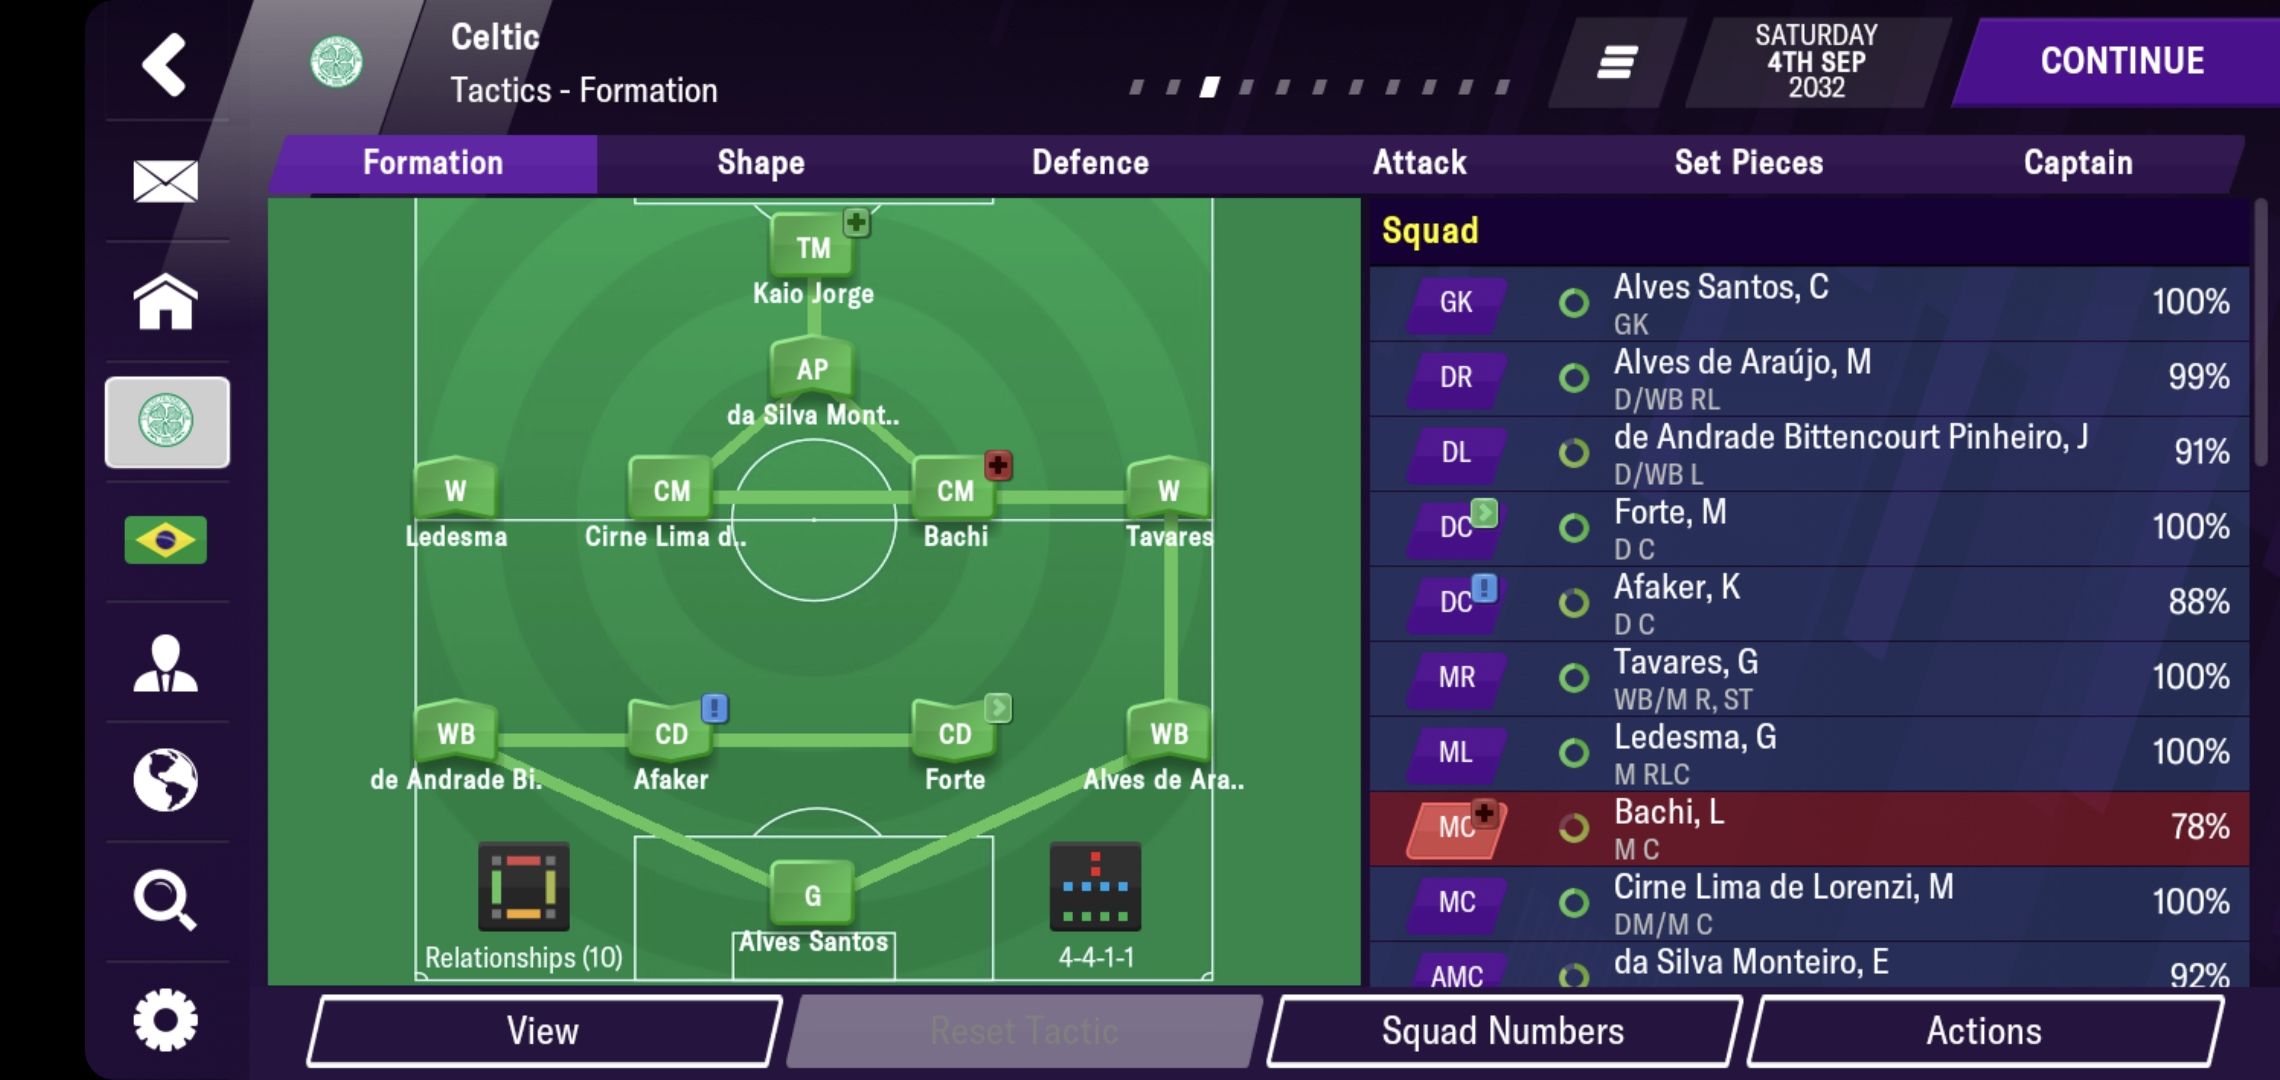 Football Manager 2021 tactics: The best formations and setups in FM21